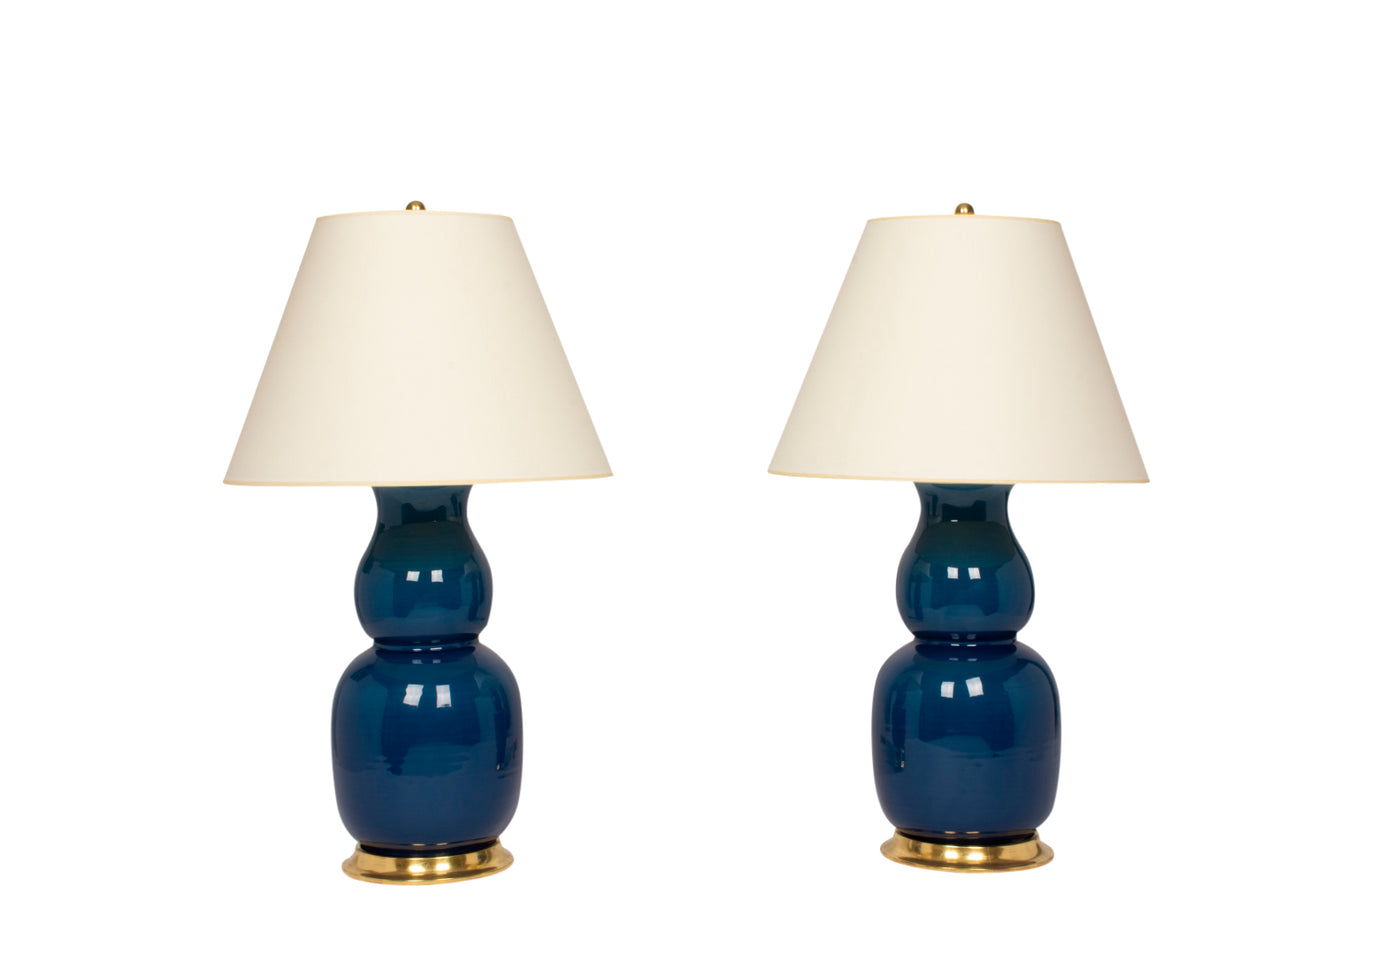 A Pair of Nicholas Table Lamps in Prussian Blue by Christopher Spitzmiller  | Newport Lamp And Shade | Located in Newport, RI